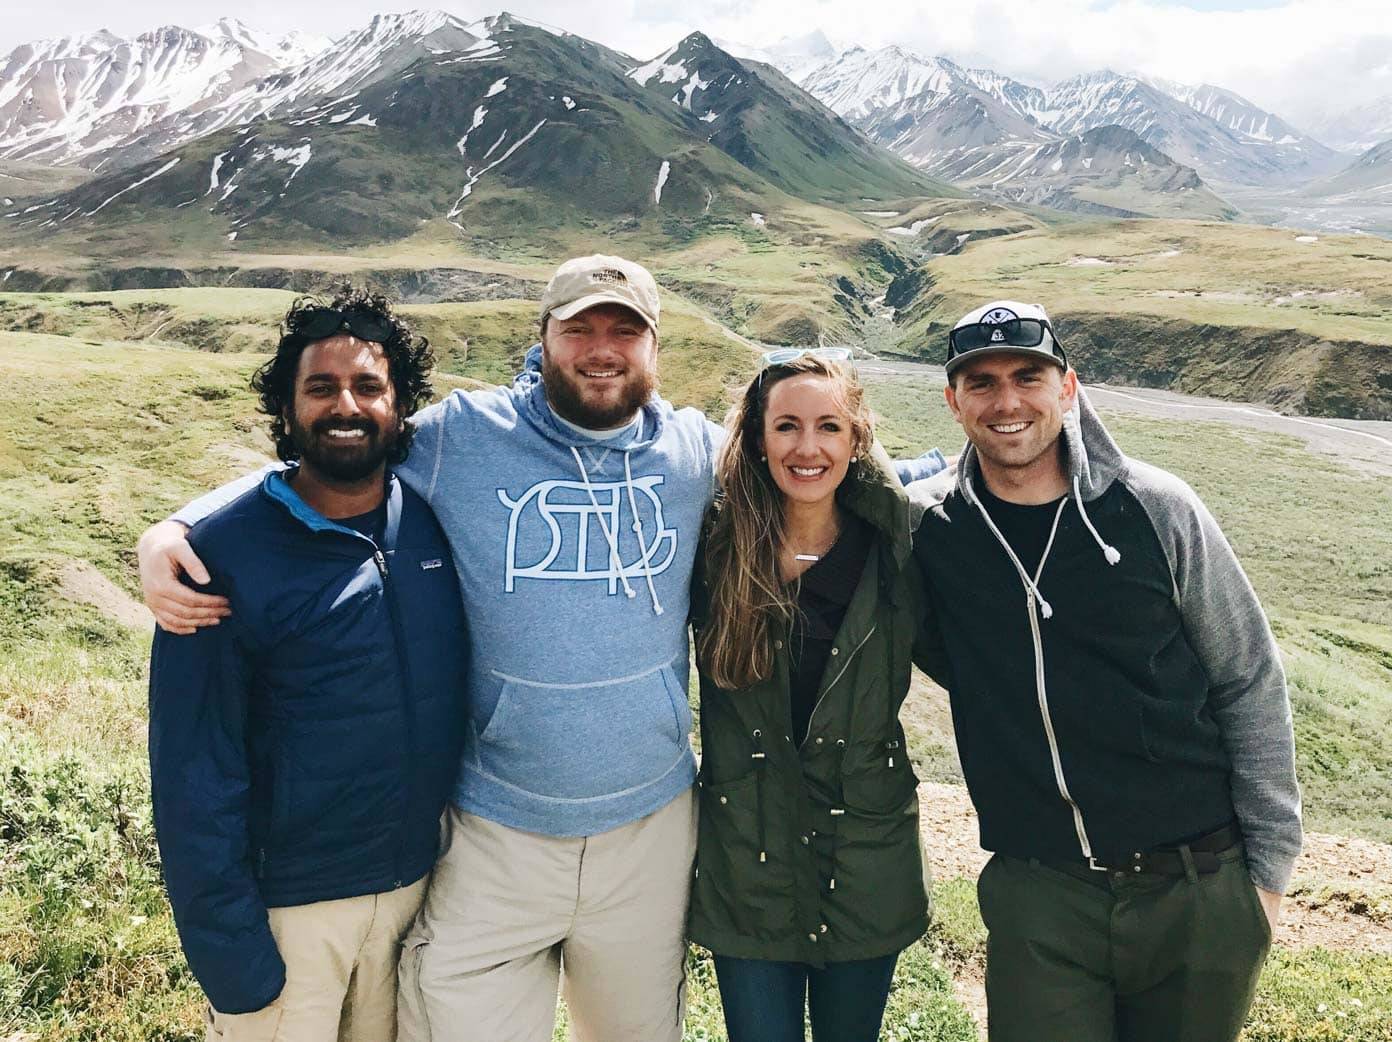 Four people smiling in front of mountains.